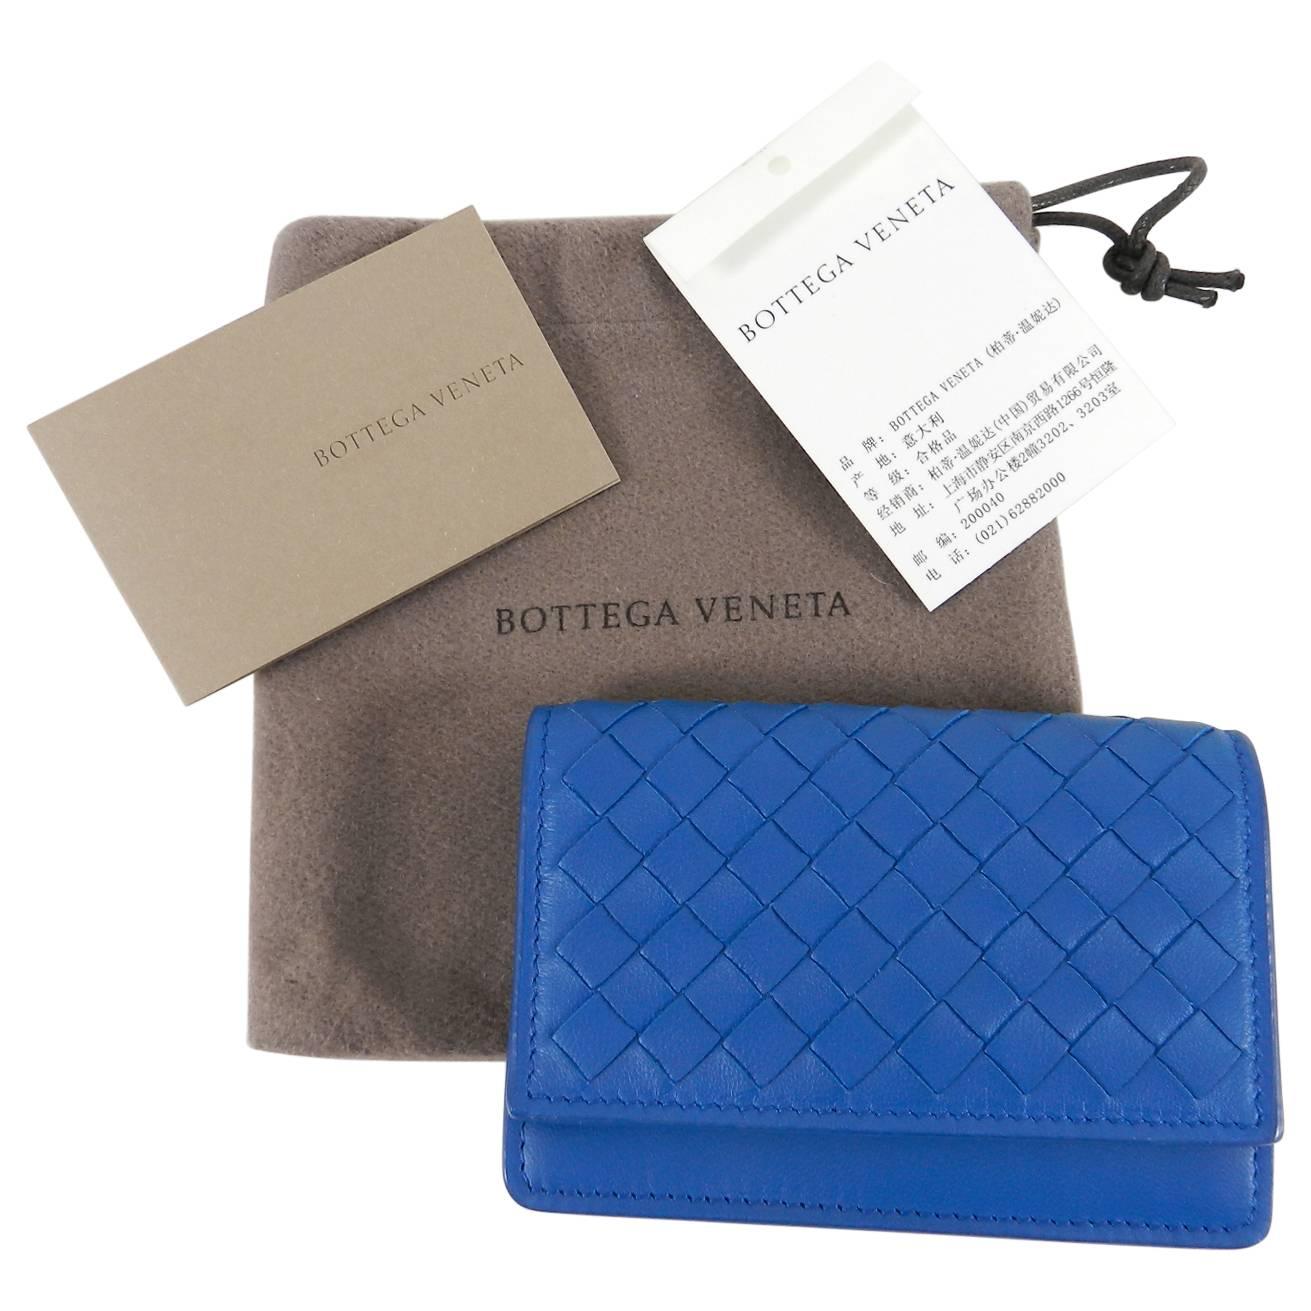 Bottega Veneta Blue Intrecciato Nappa Leather Snap Wallet / Card Case.  Brand new unused without tags.  Includes leather care card, product tag, duster.  Measures 4.5 x 3 x 0.5”